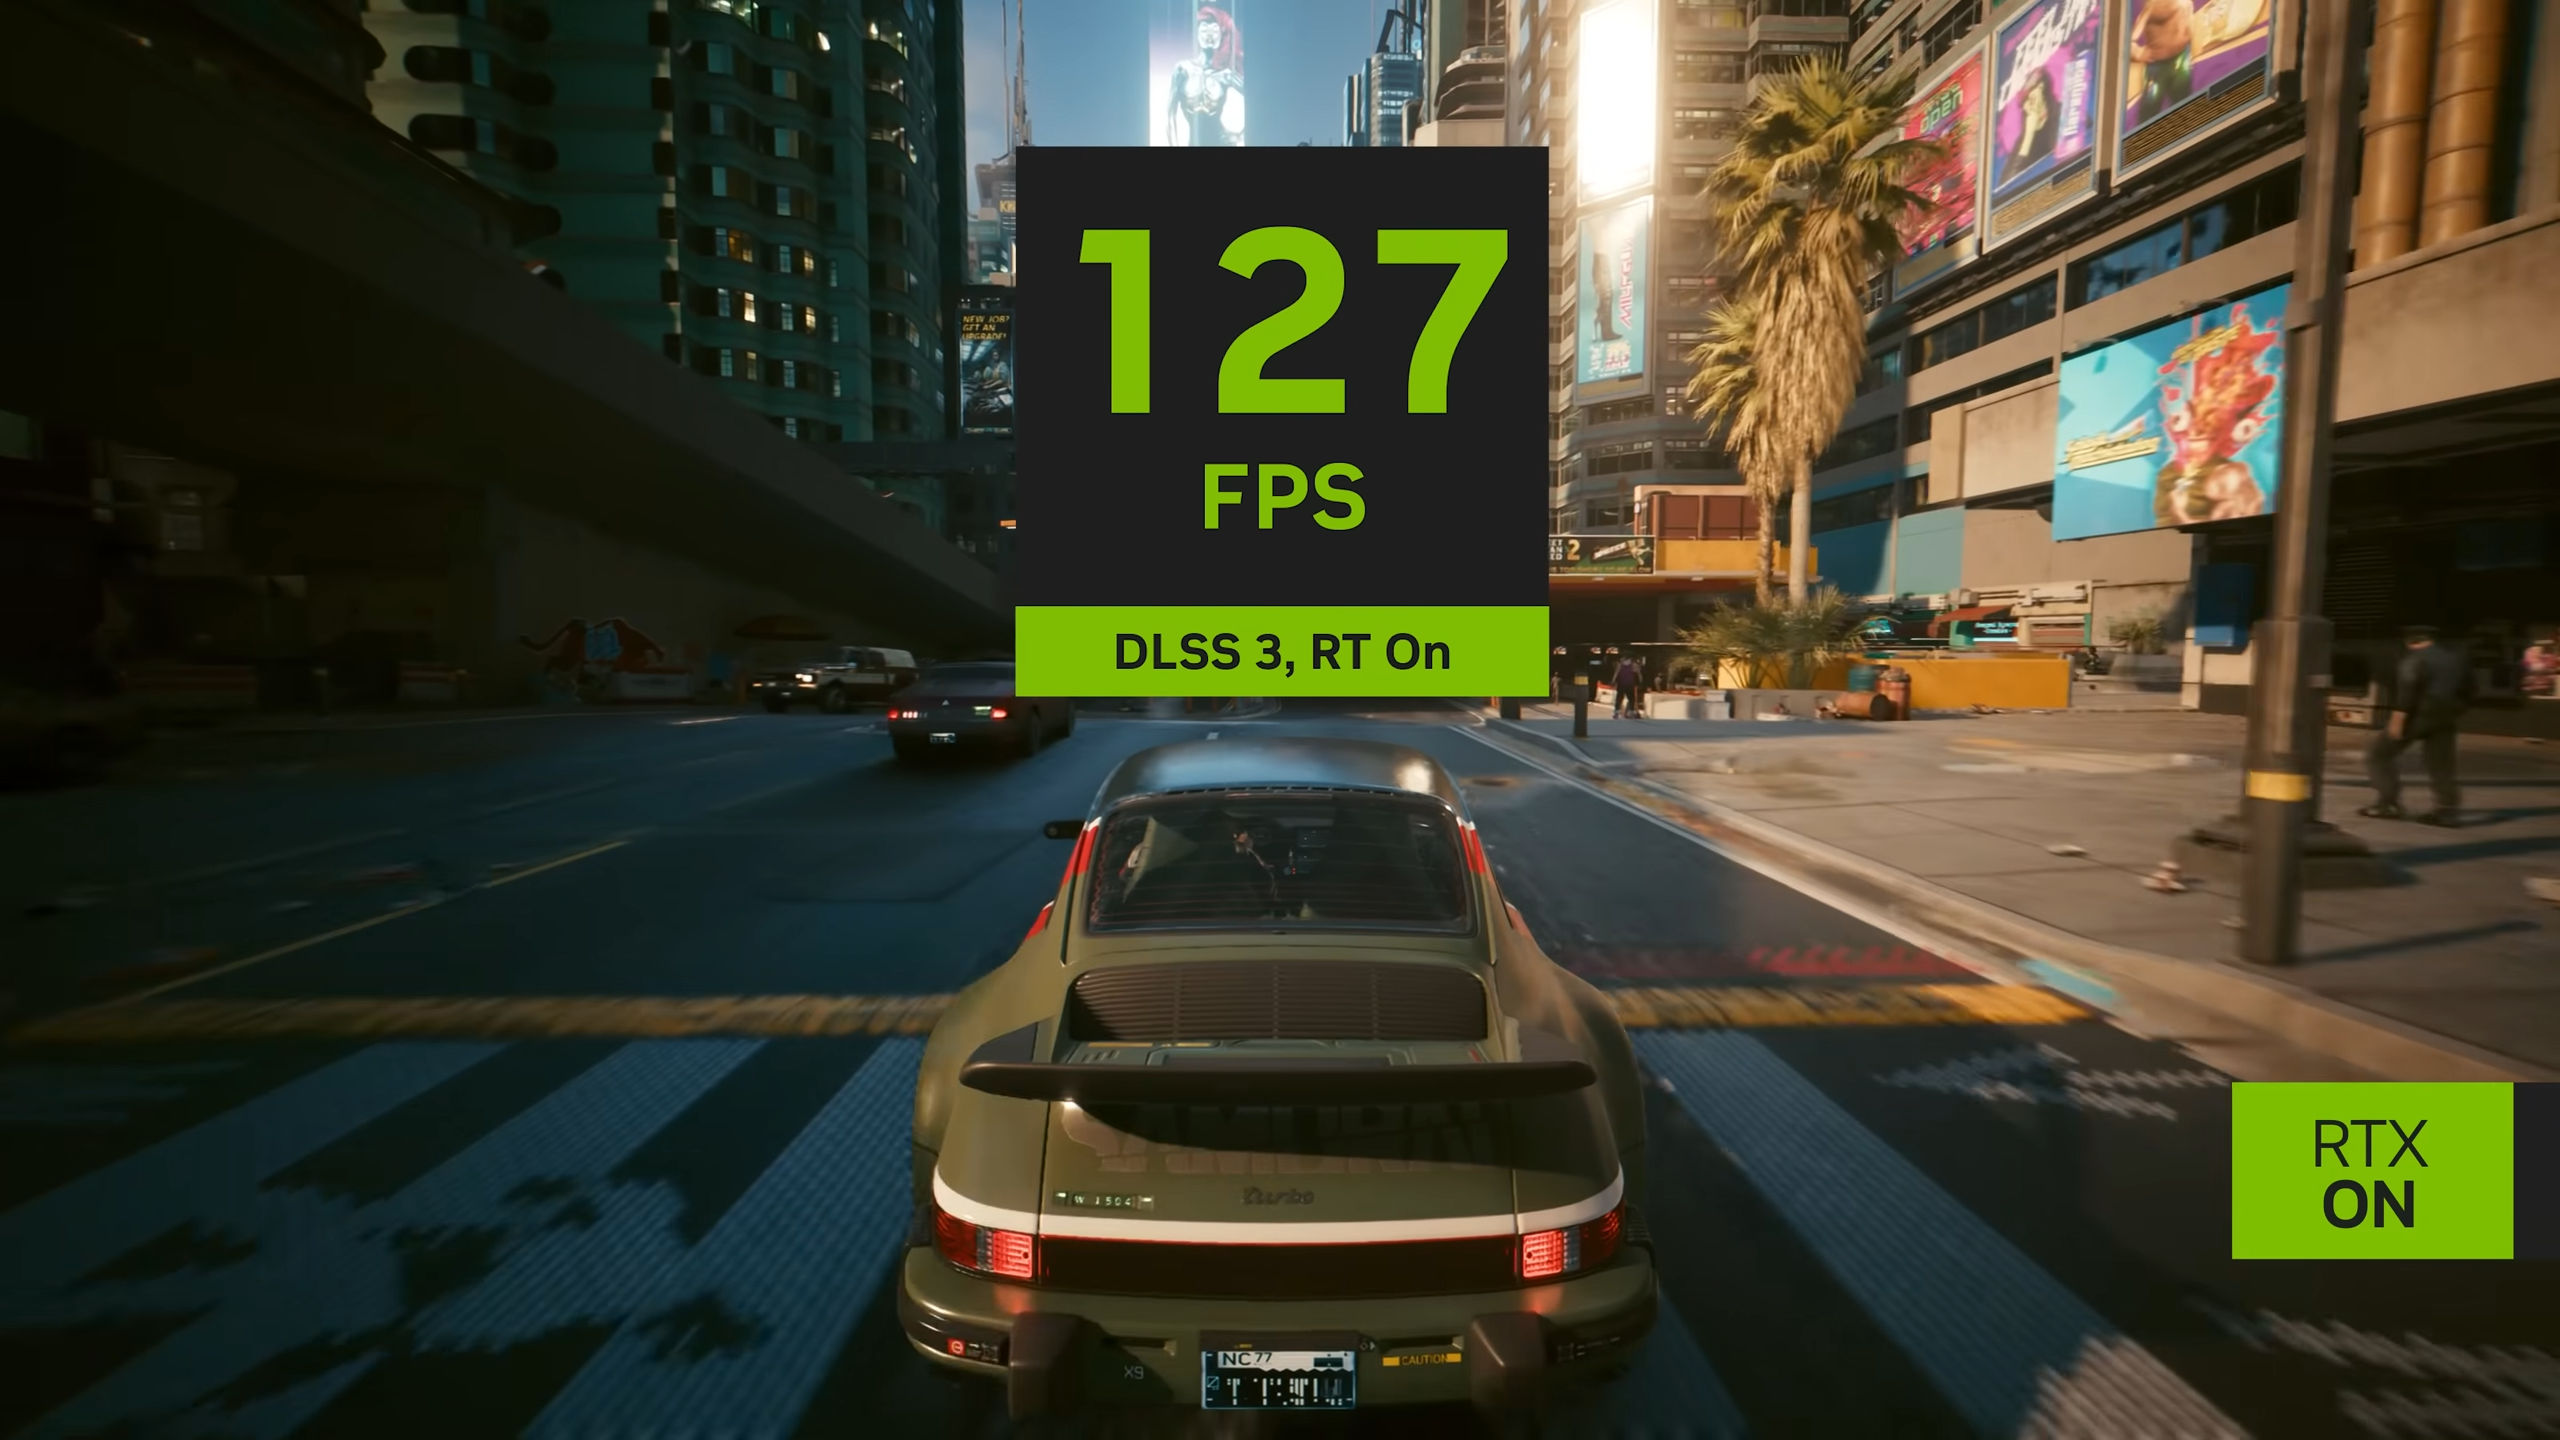 Cyberpunk 2077's Ray Tracing: Overdrive Mode Brings RTX 4090 to Its Knees  with DLSS Off at 16 FPS in 4K